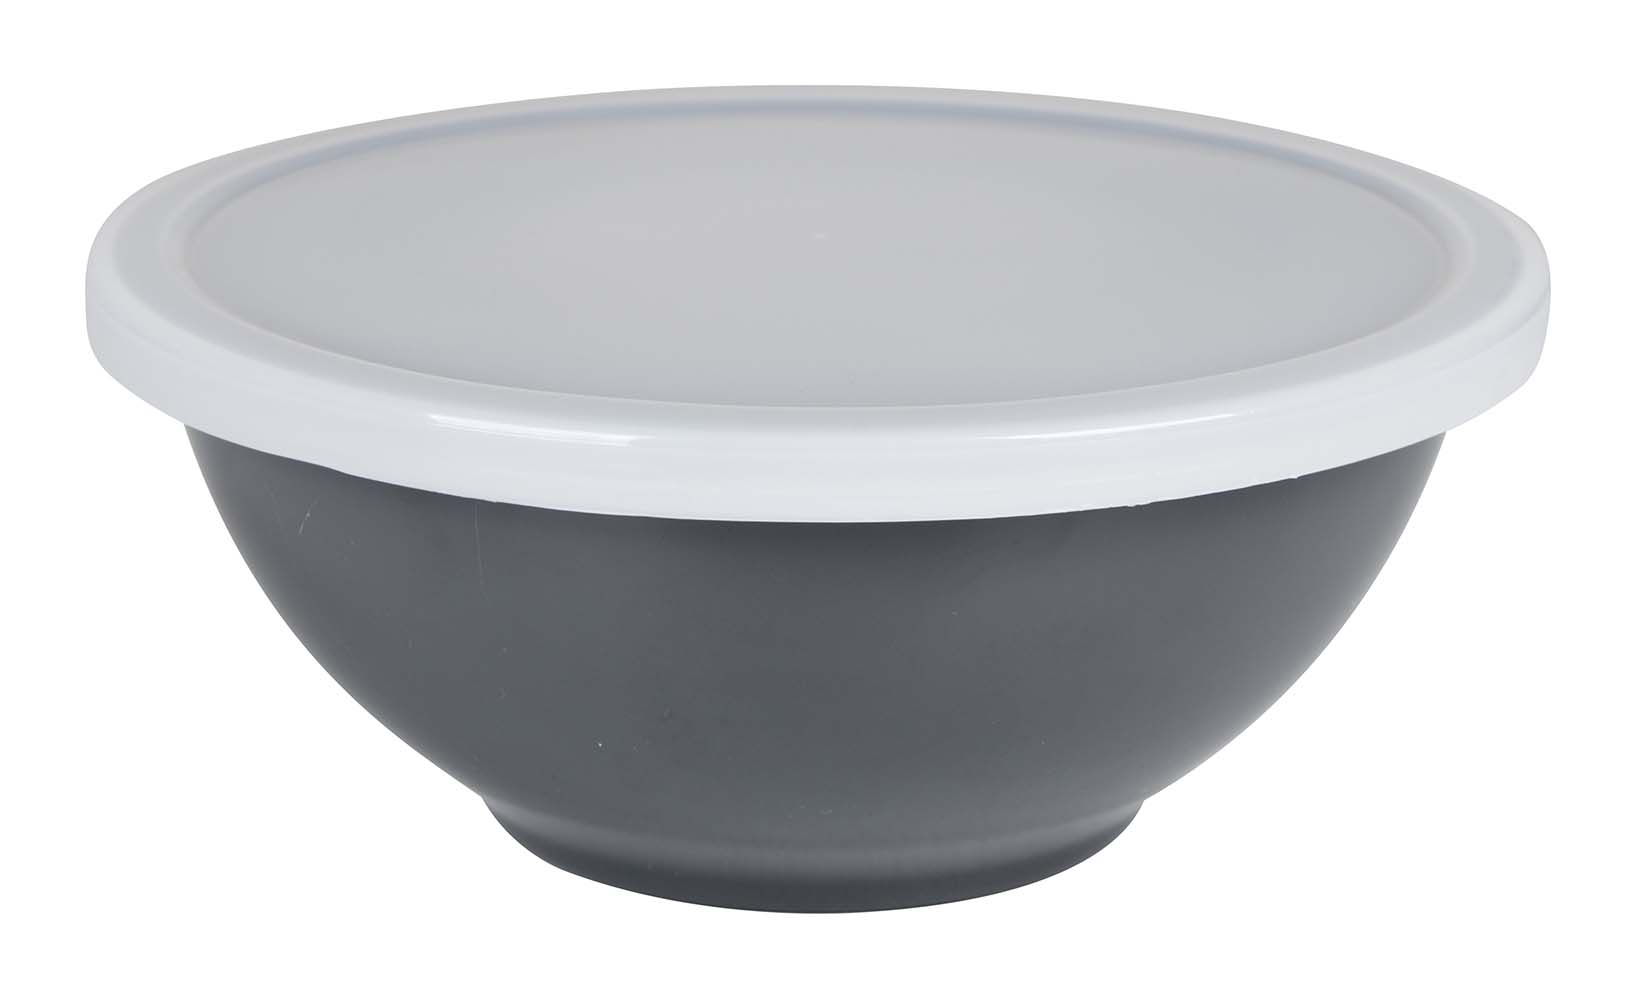 6181255 A round bowl with lid. The bowl is made from 100% melamine and has a synthetic lid. This high-quality melamine bowl is virtually unbreakable and very light weight. The bowl is also scratch resistant and dishwasher safe.